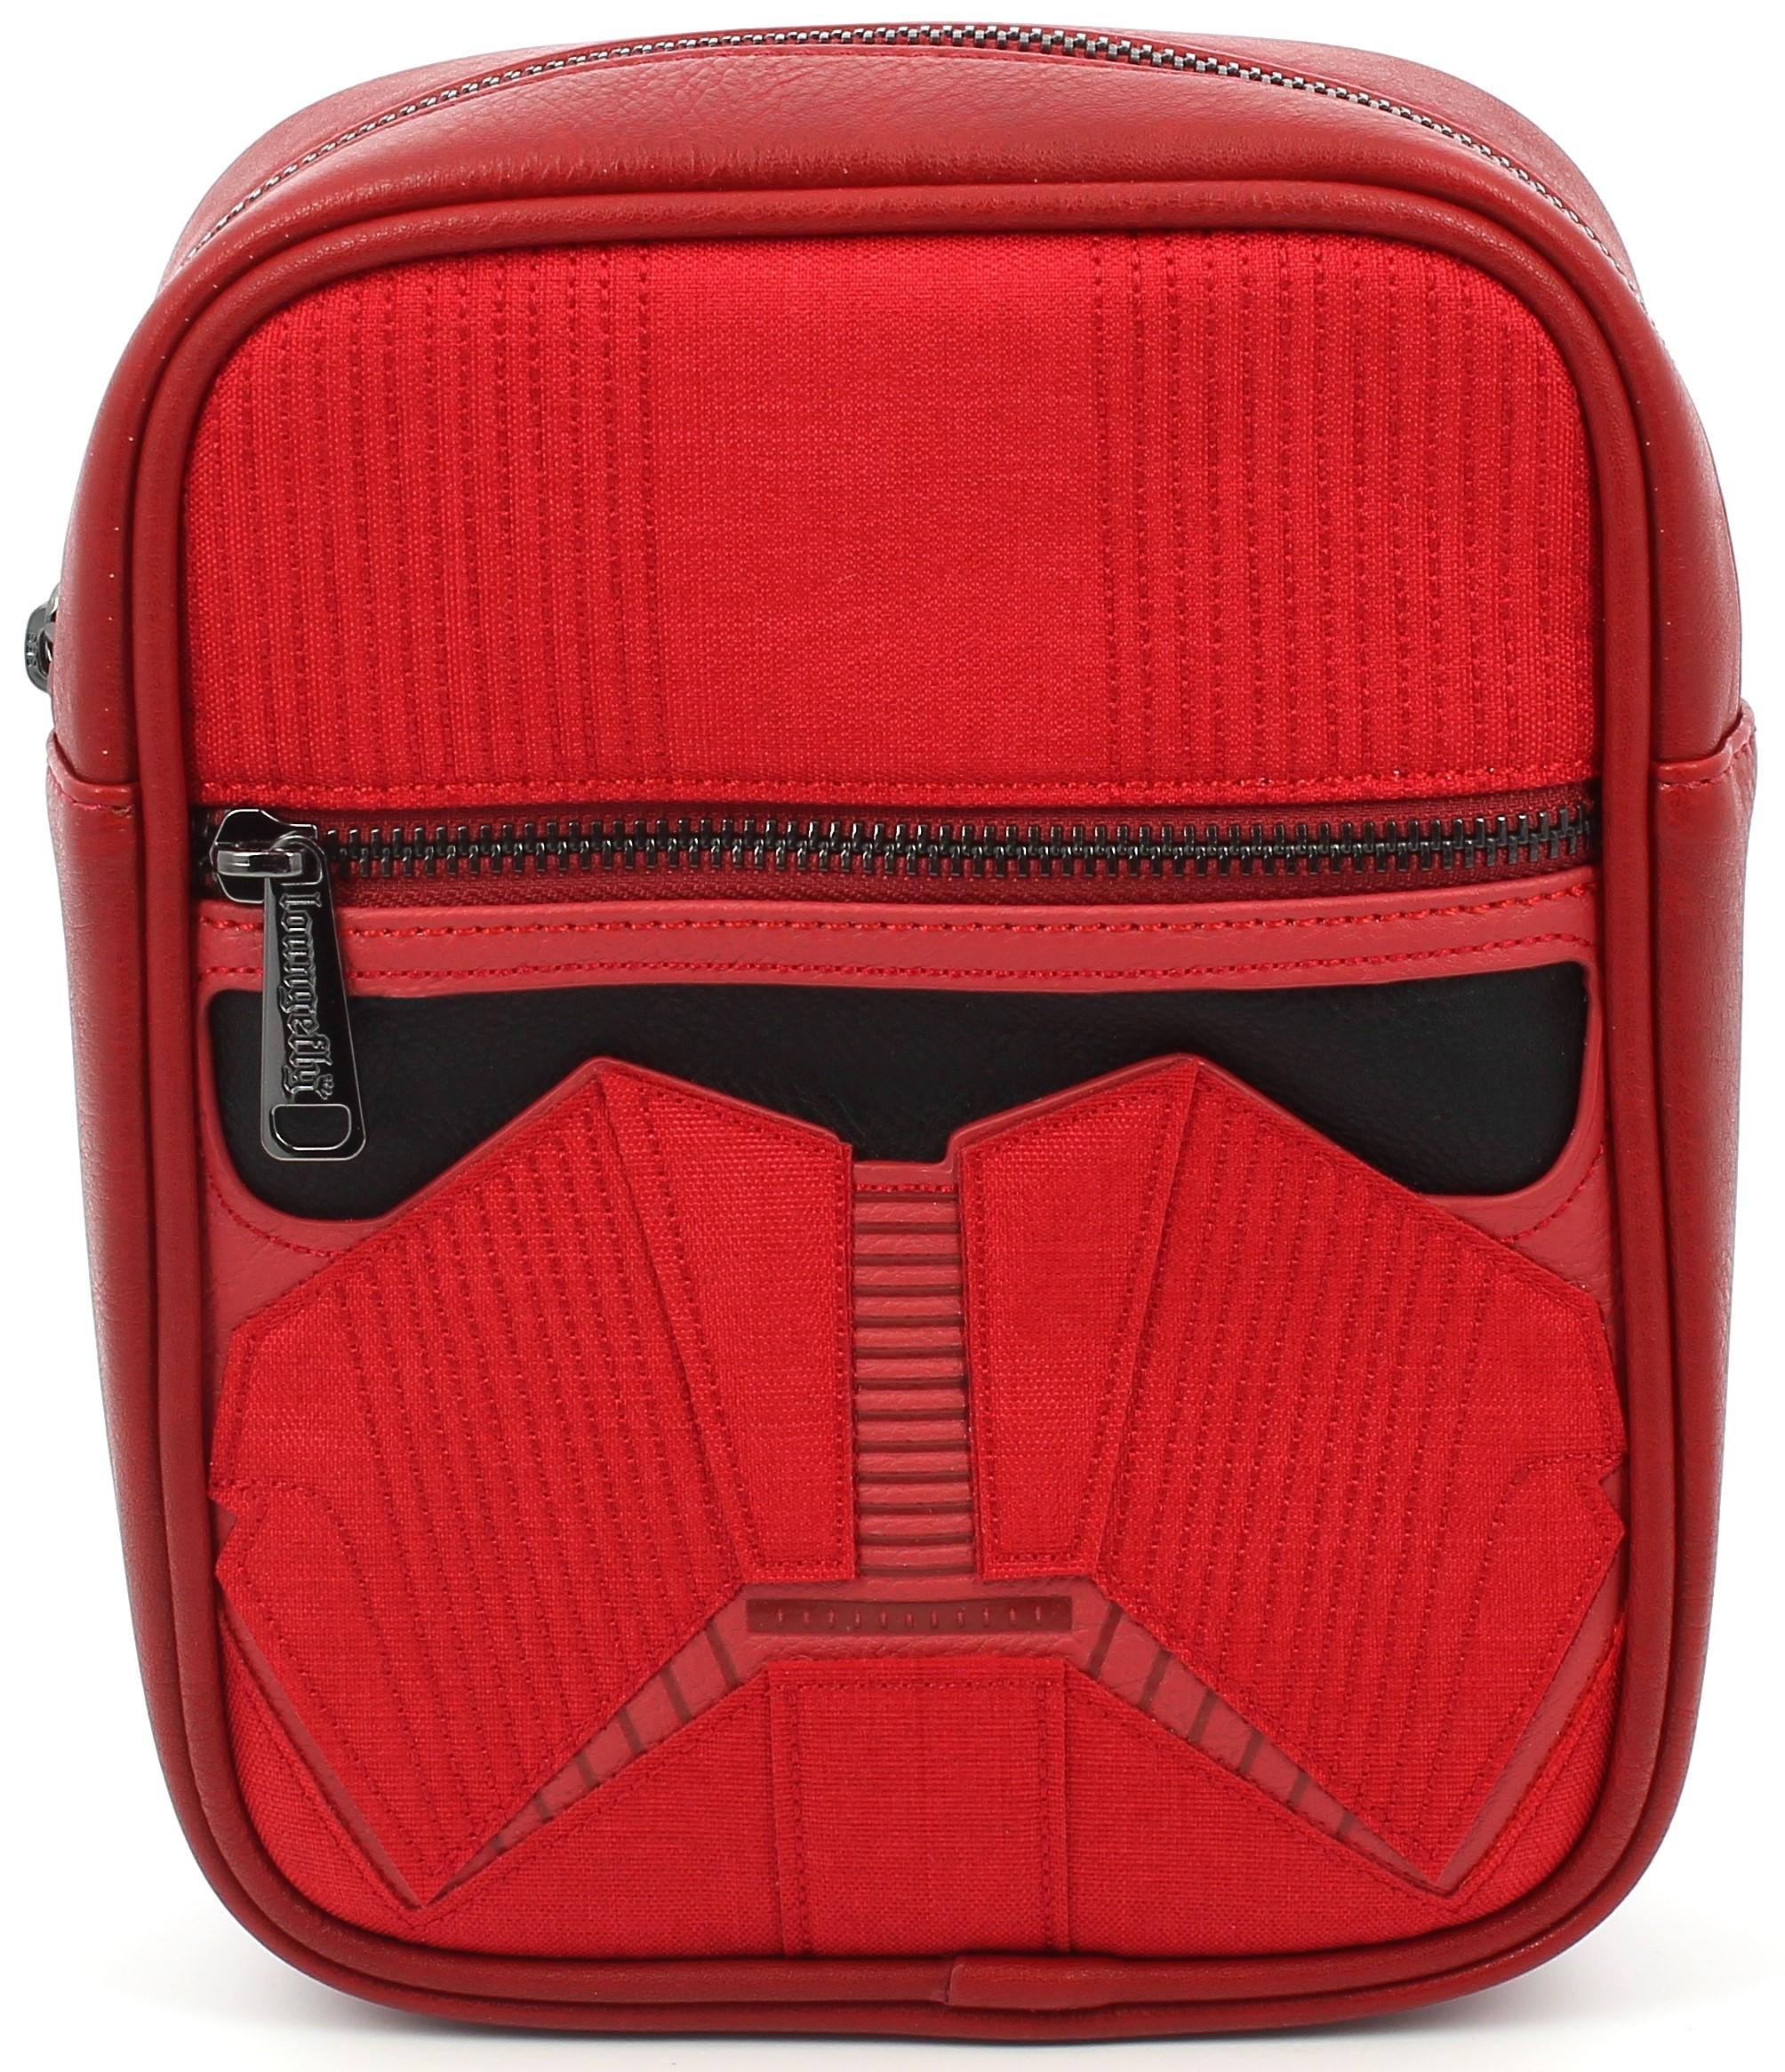 Loungefly Star Wars Ep9 Red Sith Faux Leather Cross-Body